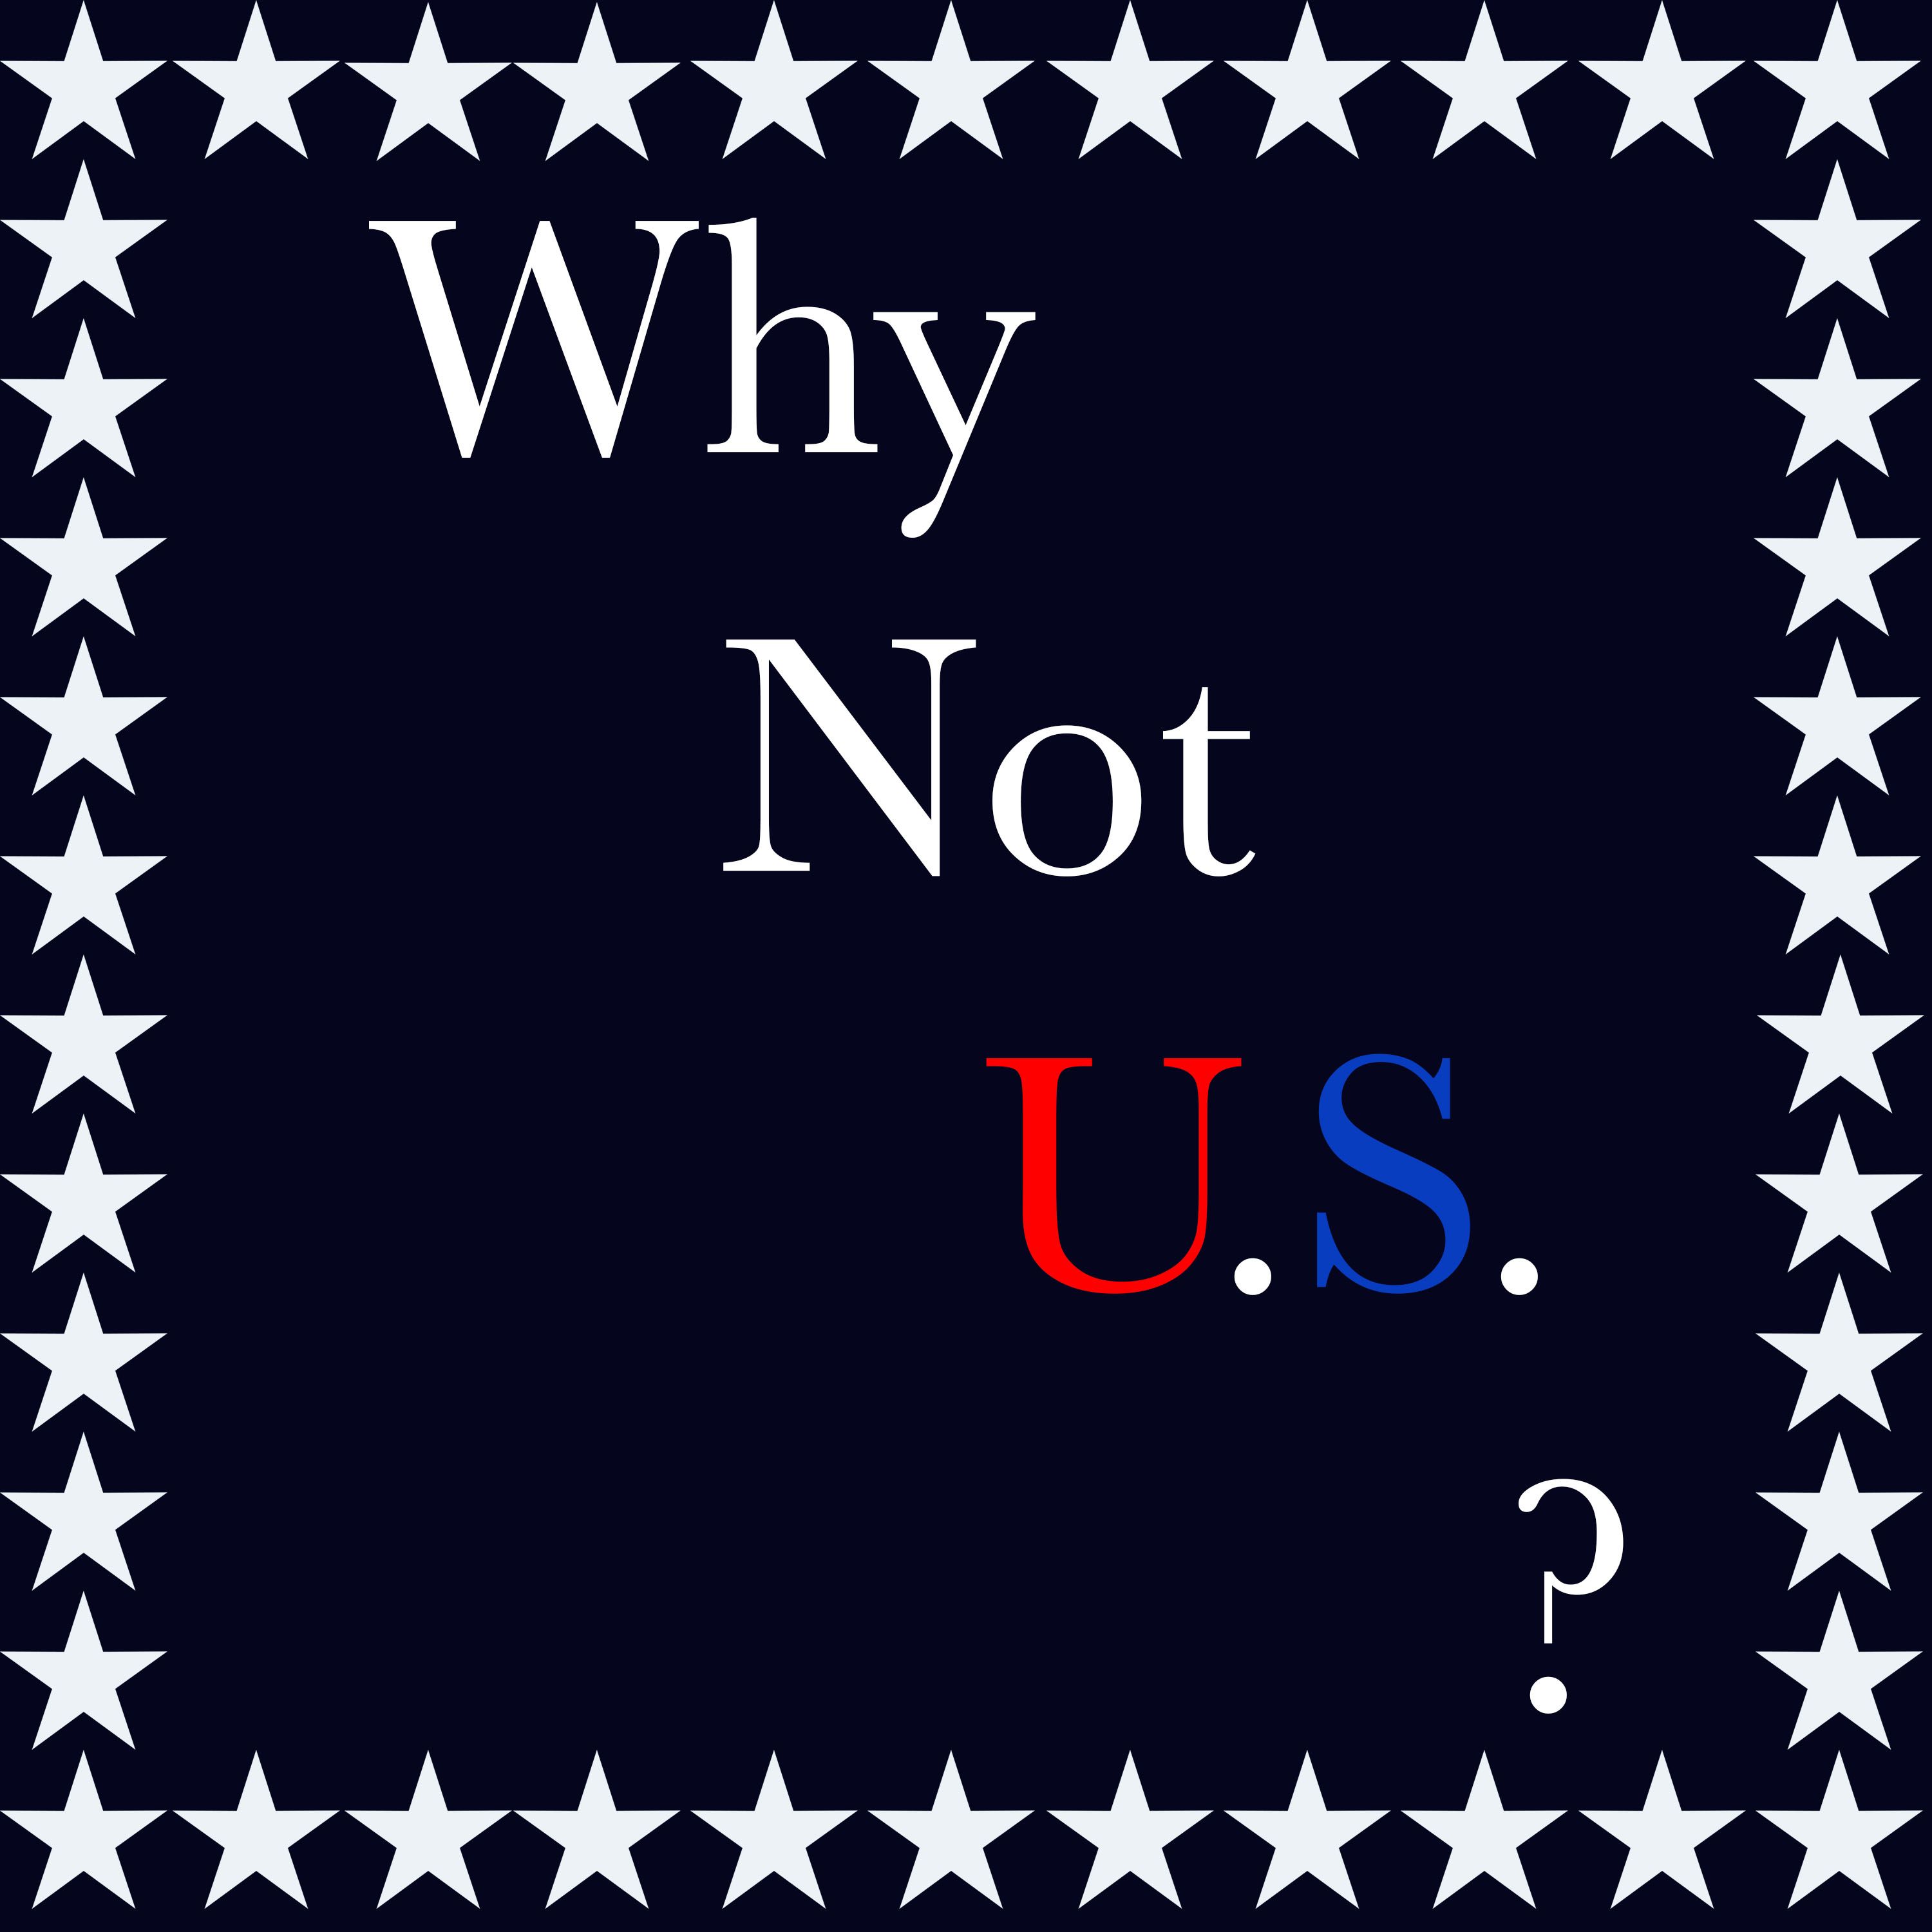 Why Not U.S.?